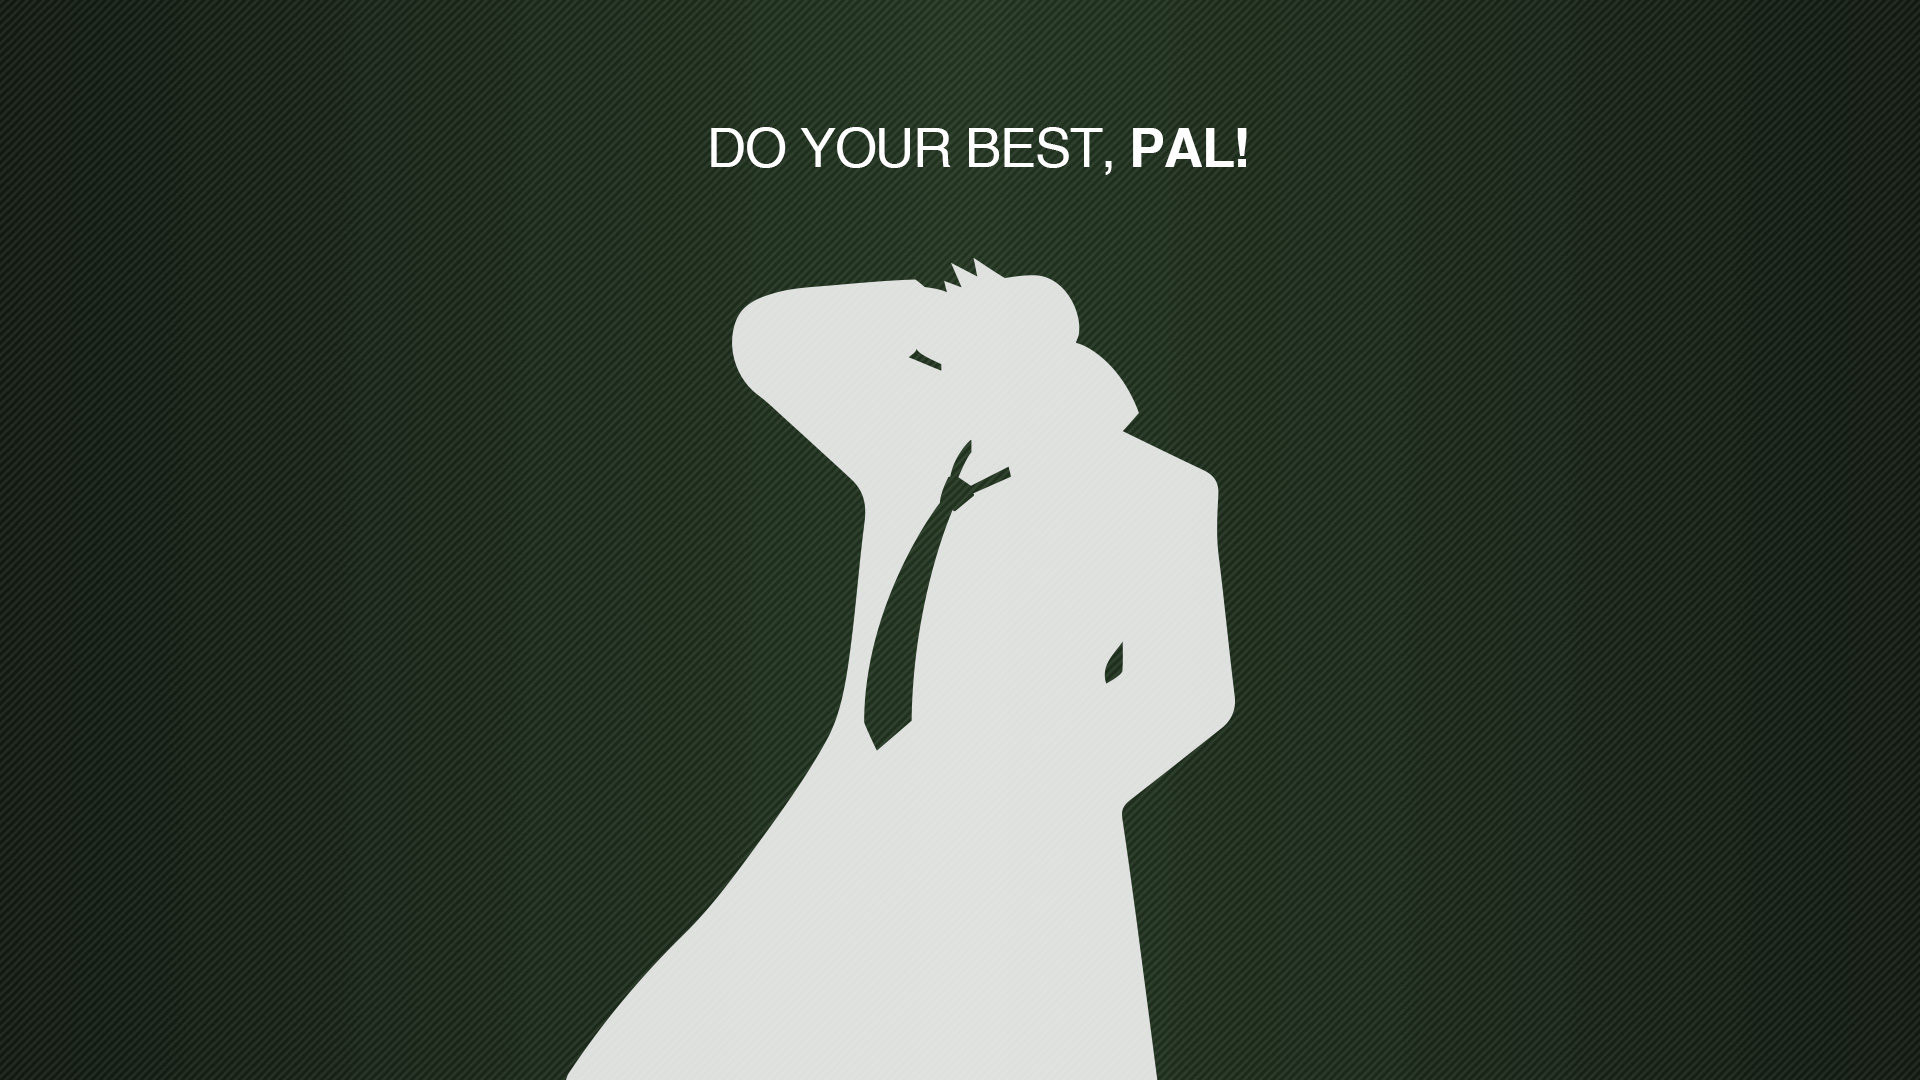 Do you best, PAL! wallpaper by sirarles on DeviantArt